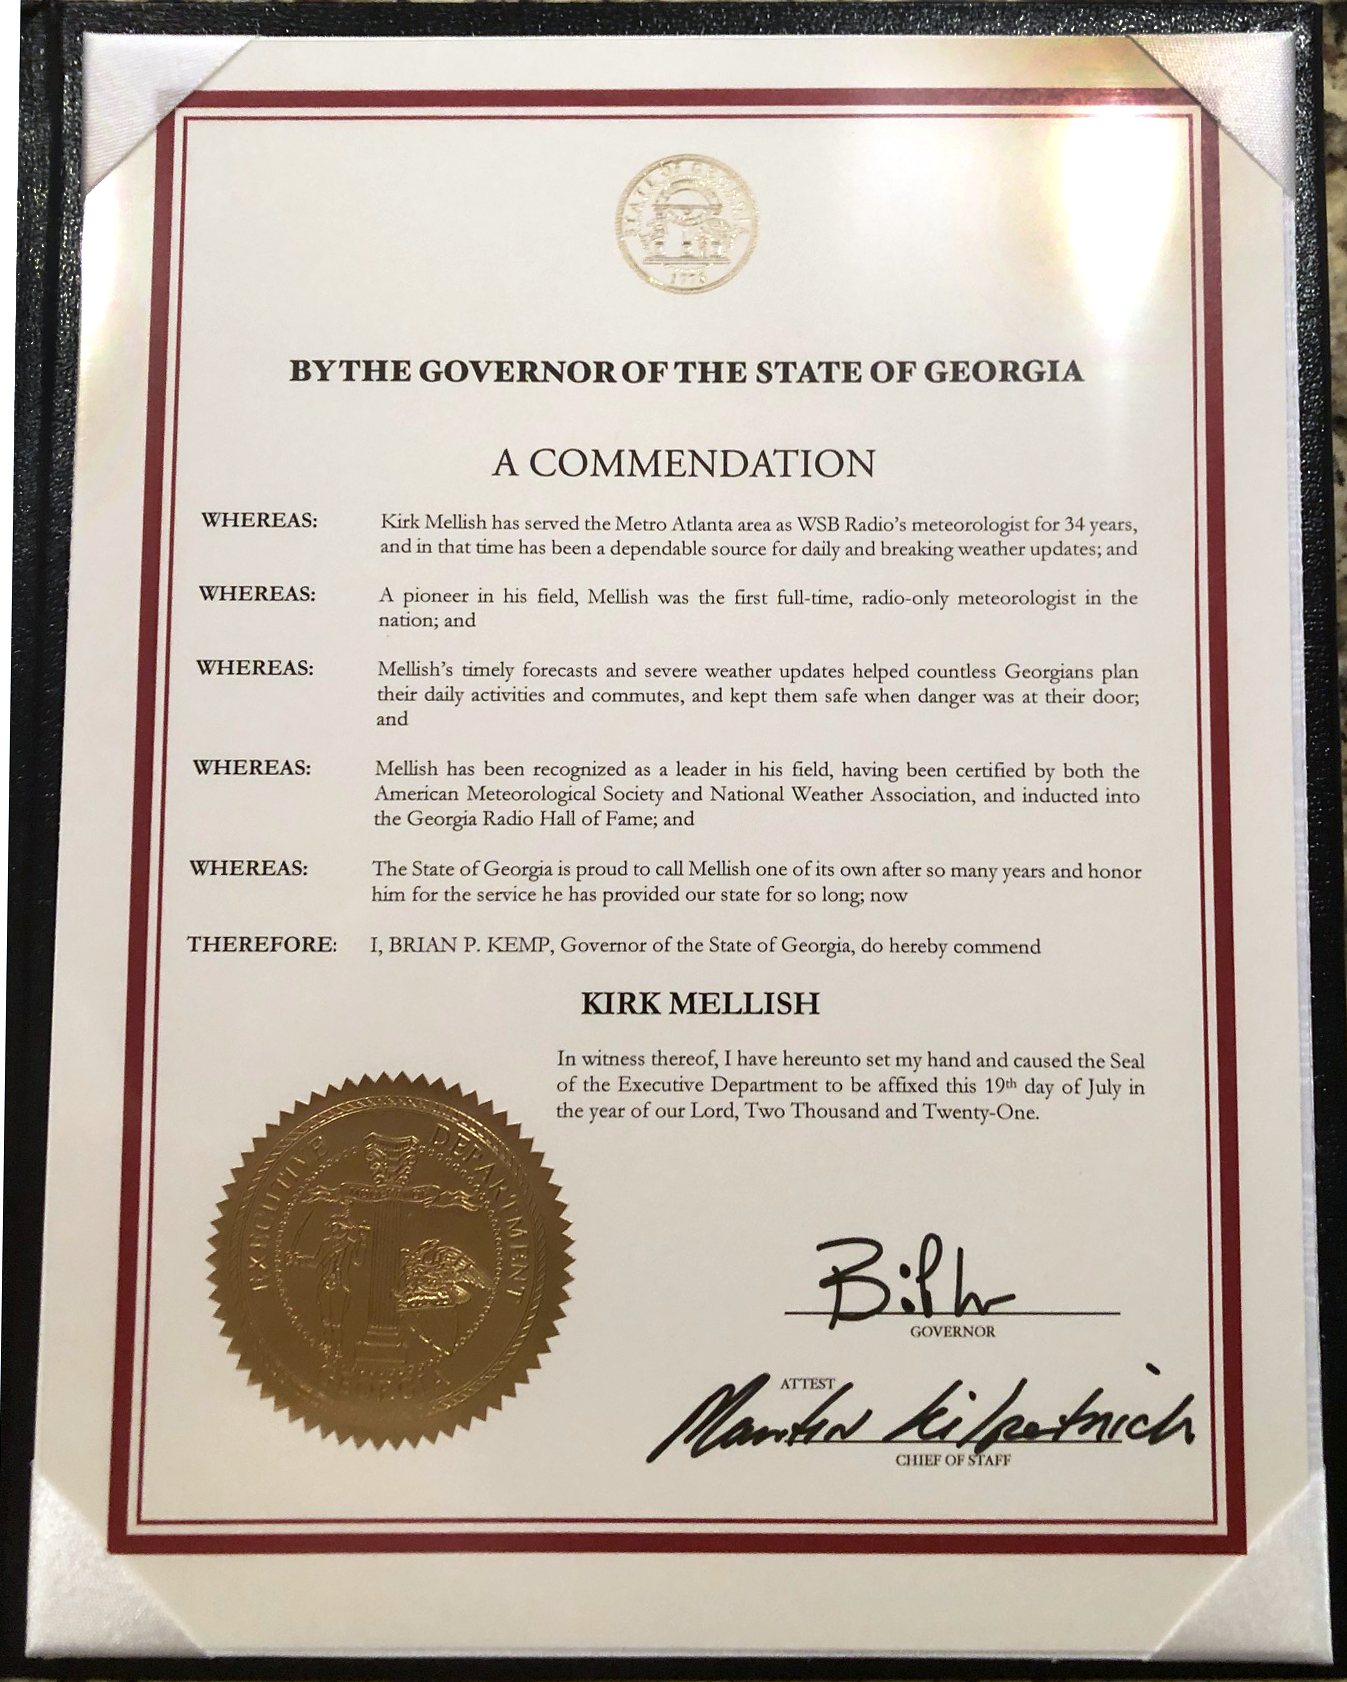 The Governor's Commendation.